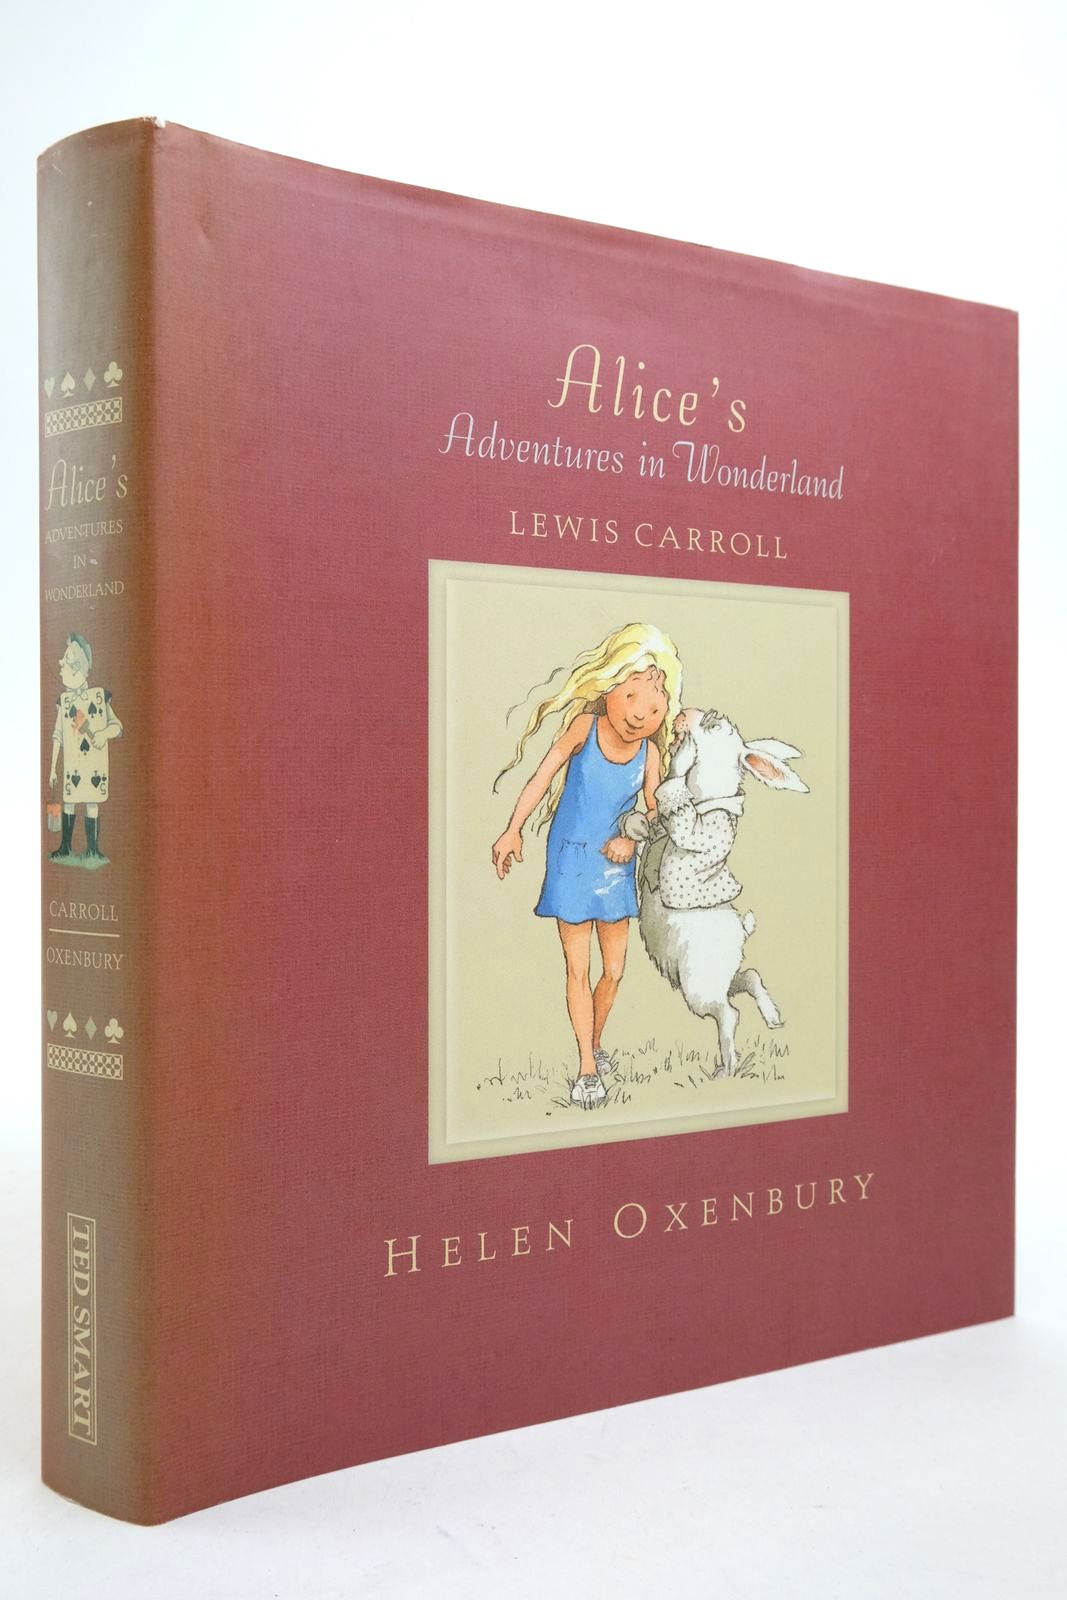 Photo of ALICE'S ADVENTURES IN WONDERLAND written by Carroll, Lewis illustrated by Oxenbury, Helen published by Ted Smart (STOCK CODE: 2140748)  for sale by Stella & Rose's Books